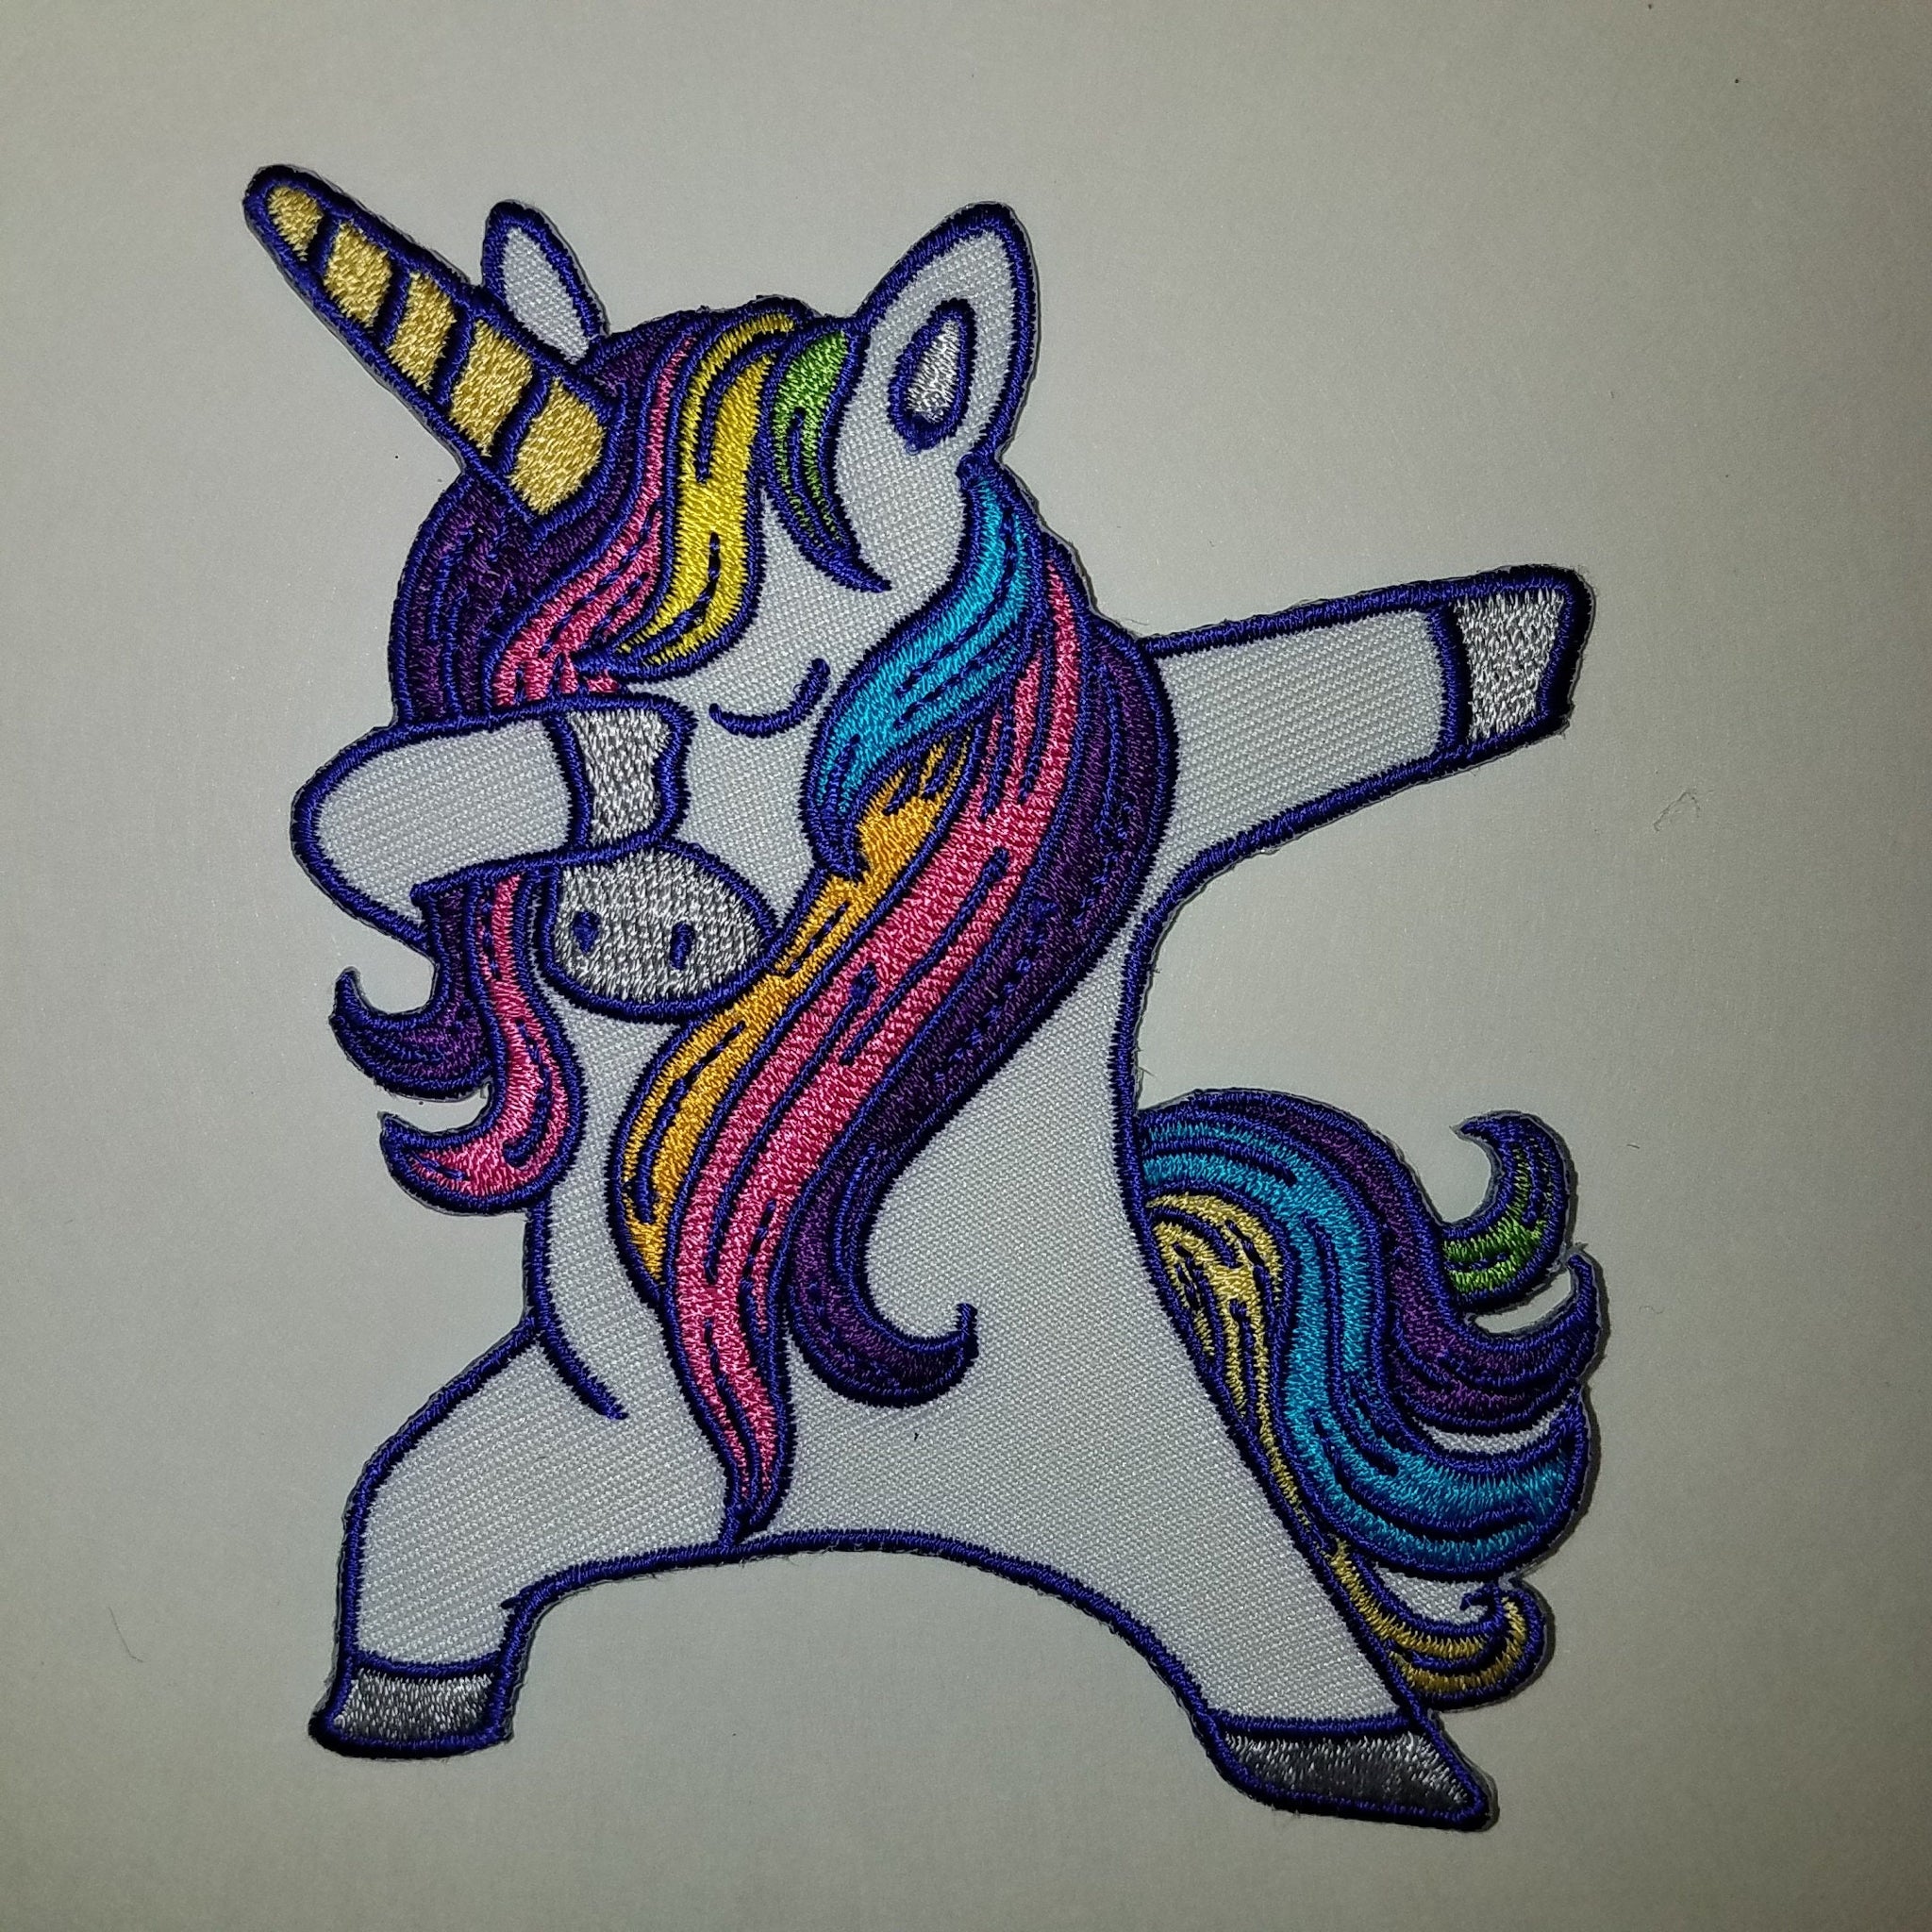 Exclusive Patch "Dabbing Unicorn" Iron-on Embroidered 3D Patch